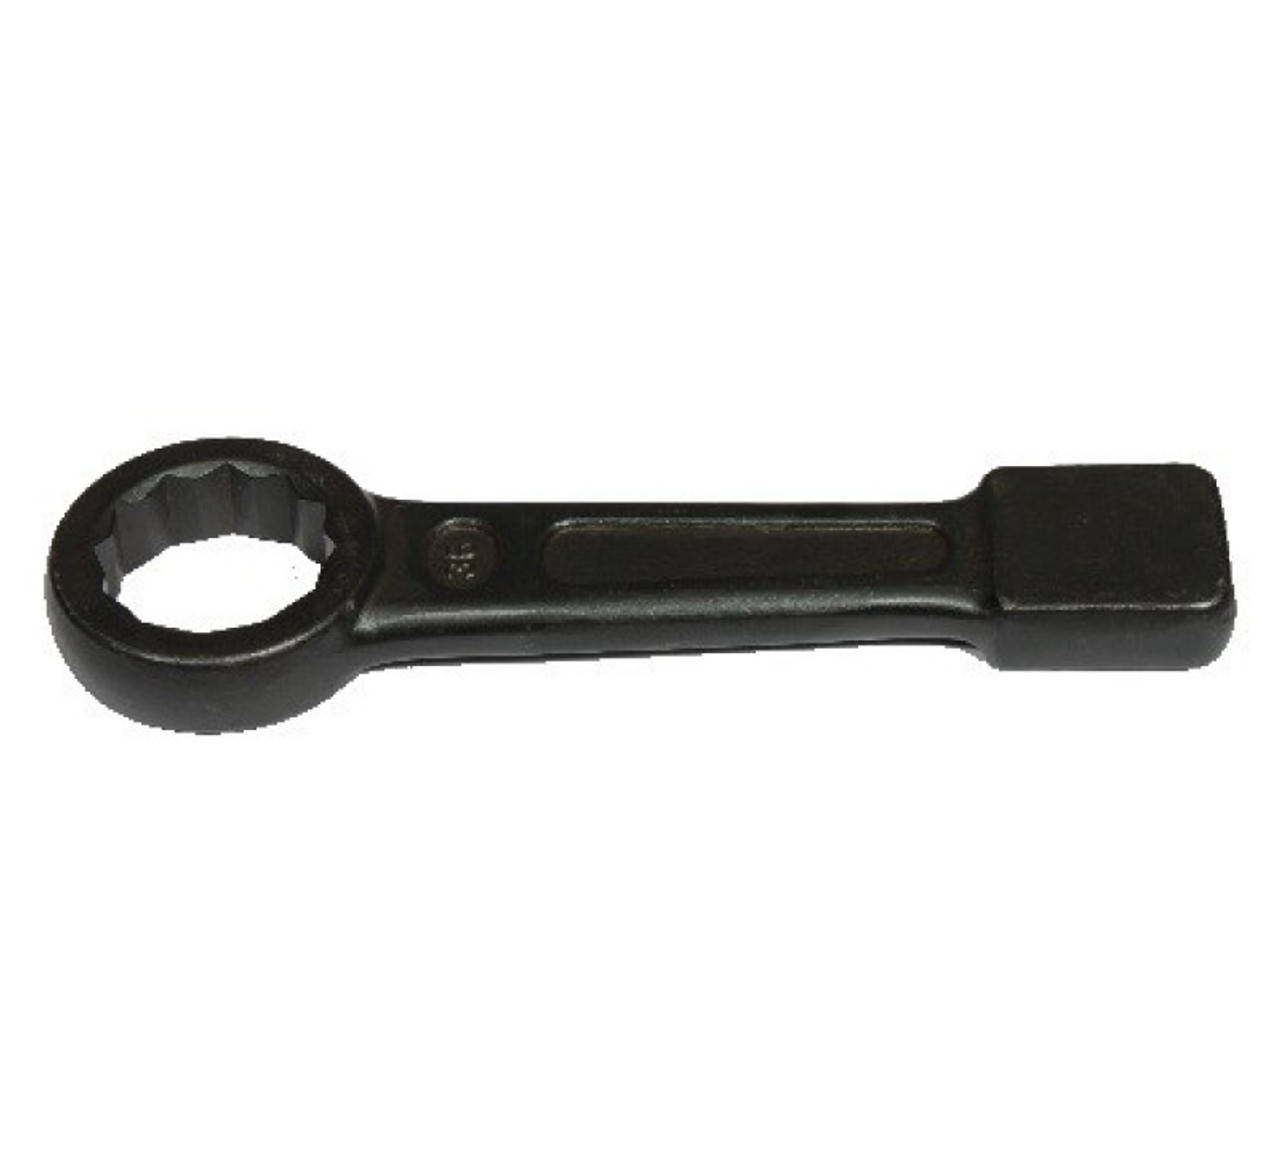 IMPA 611120 WRENCH STRIKING 12-POINT METRIC 85mm  DIN 7444